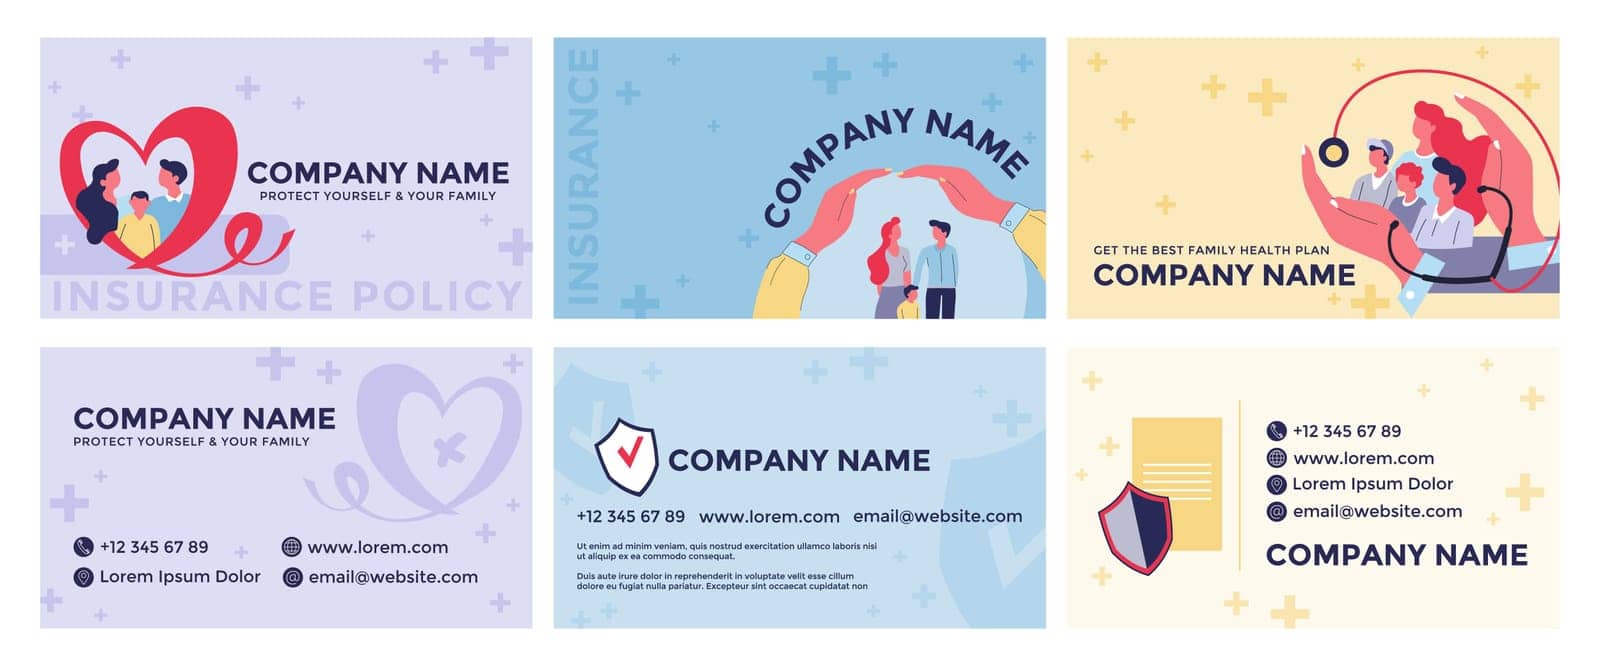 Business card design set for health insurance. Corporate company card with flat family people character get clinical policy, vector illustration. Healthcare advertising at graphic design collection